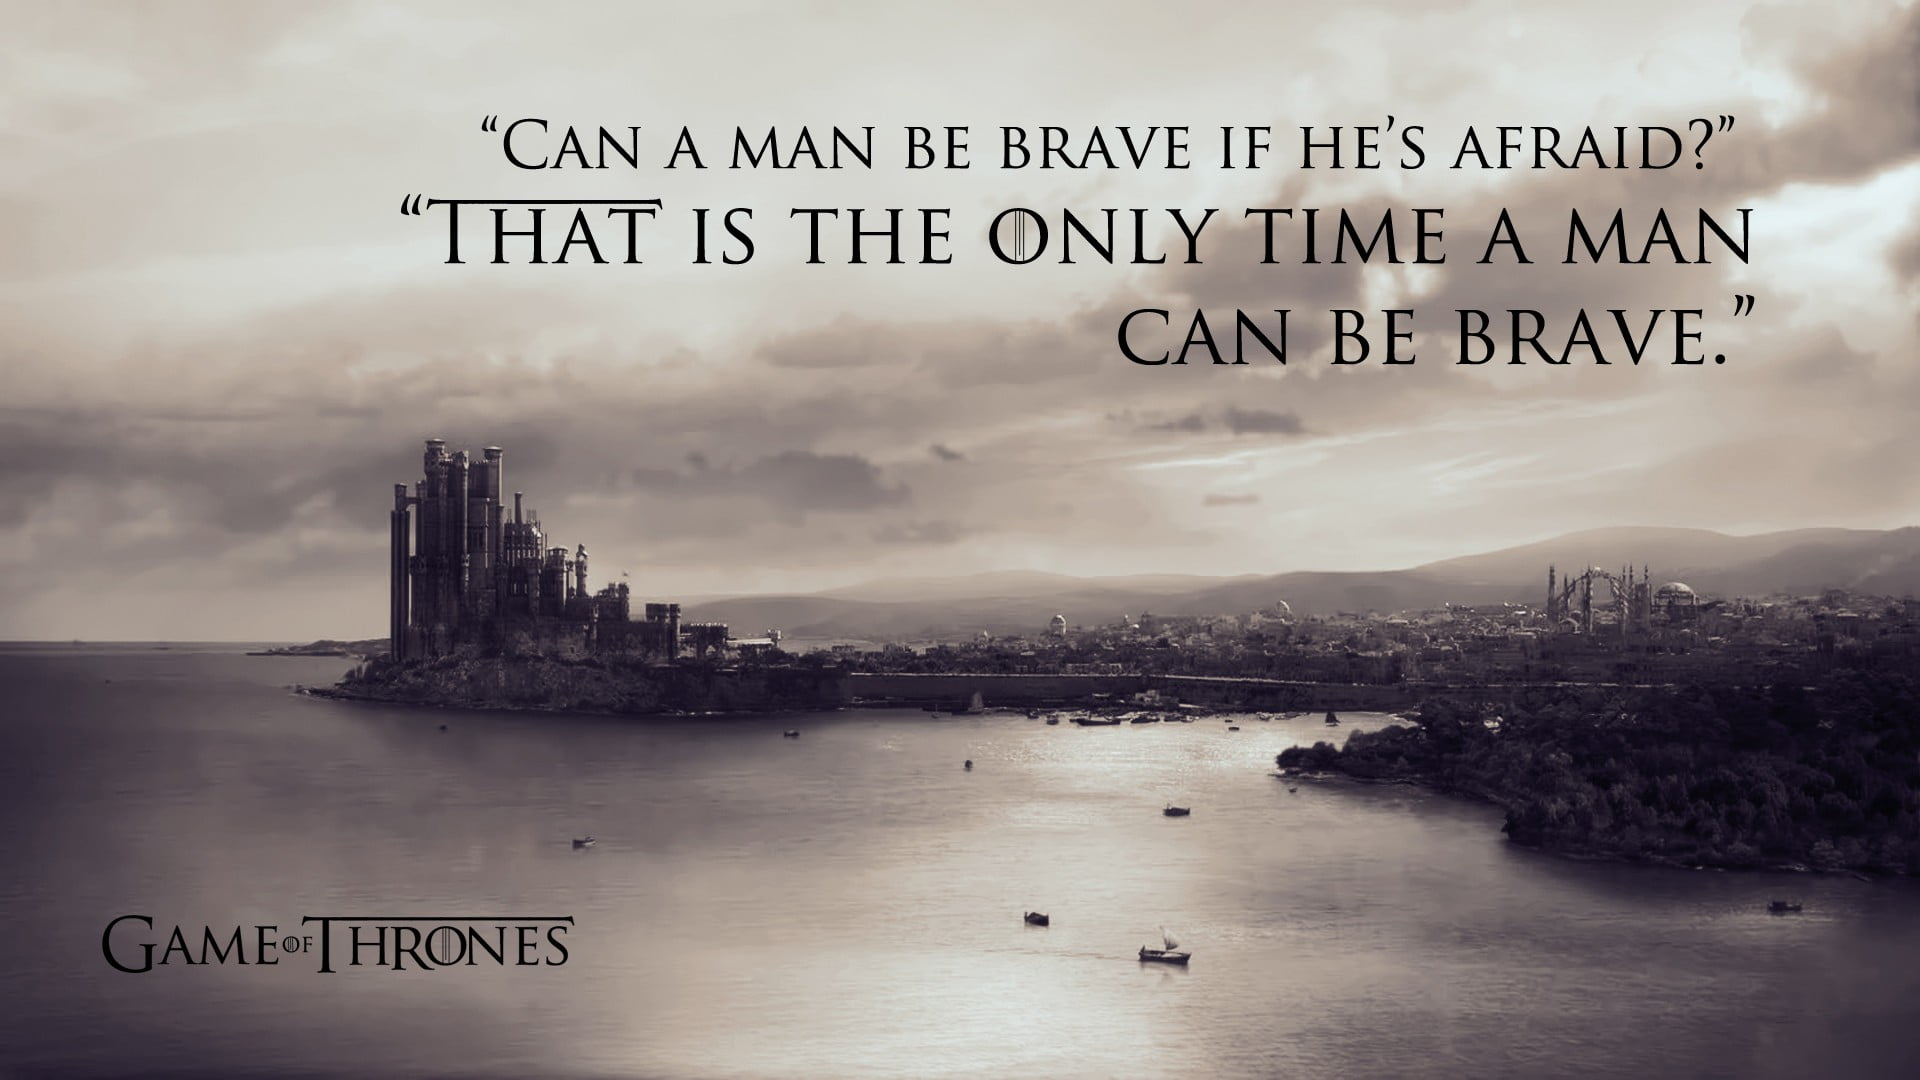 Game of Thrones wallpaper, Game of Thrones quote, TV, monochrome